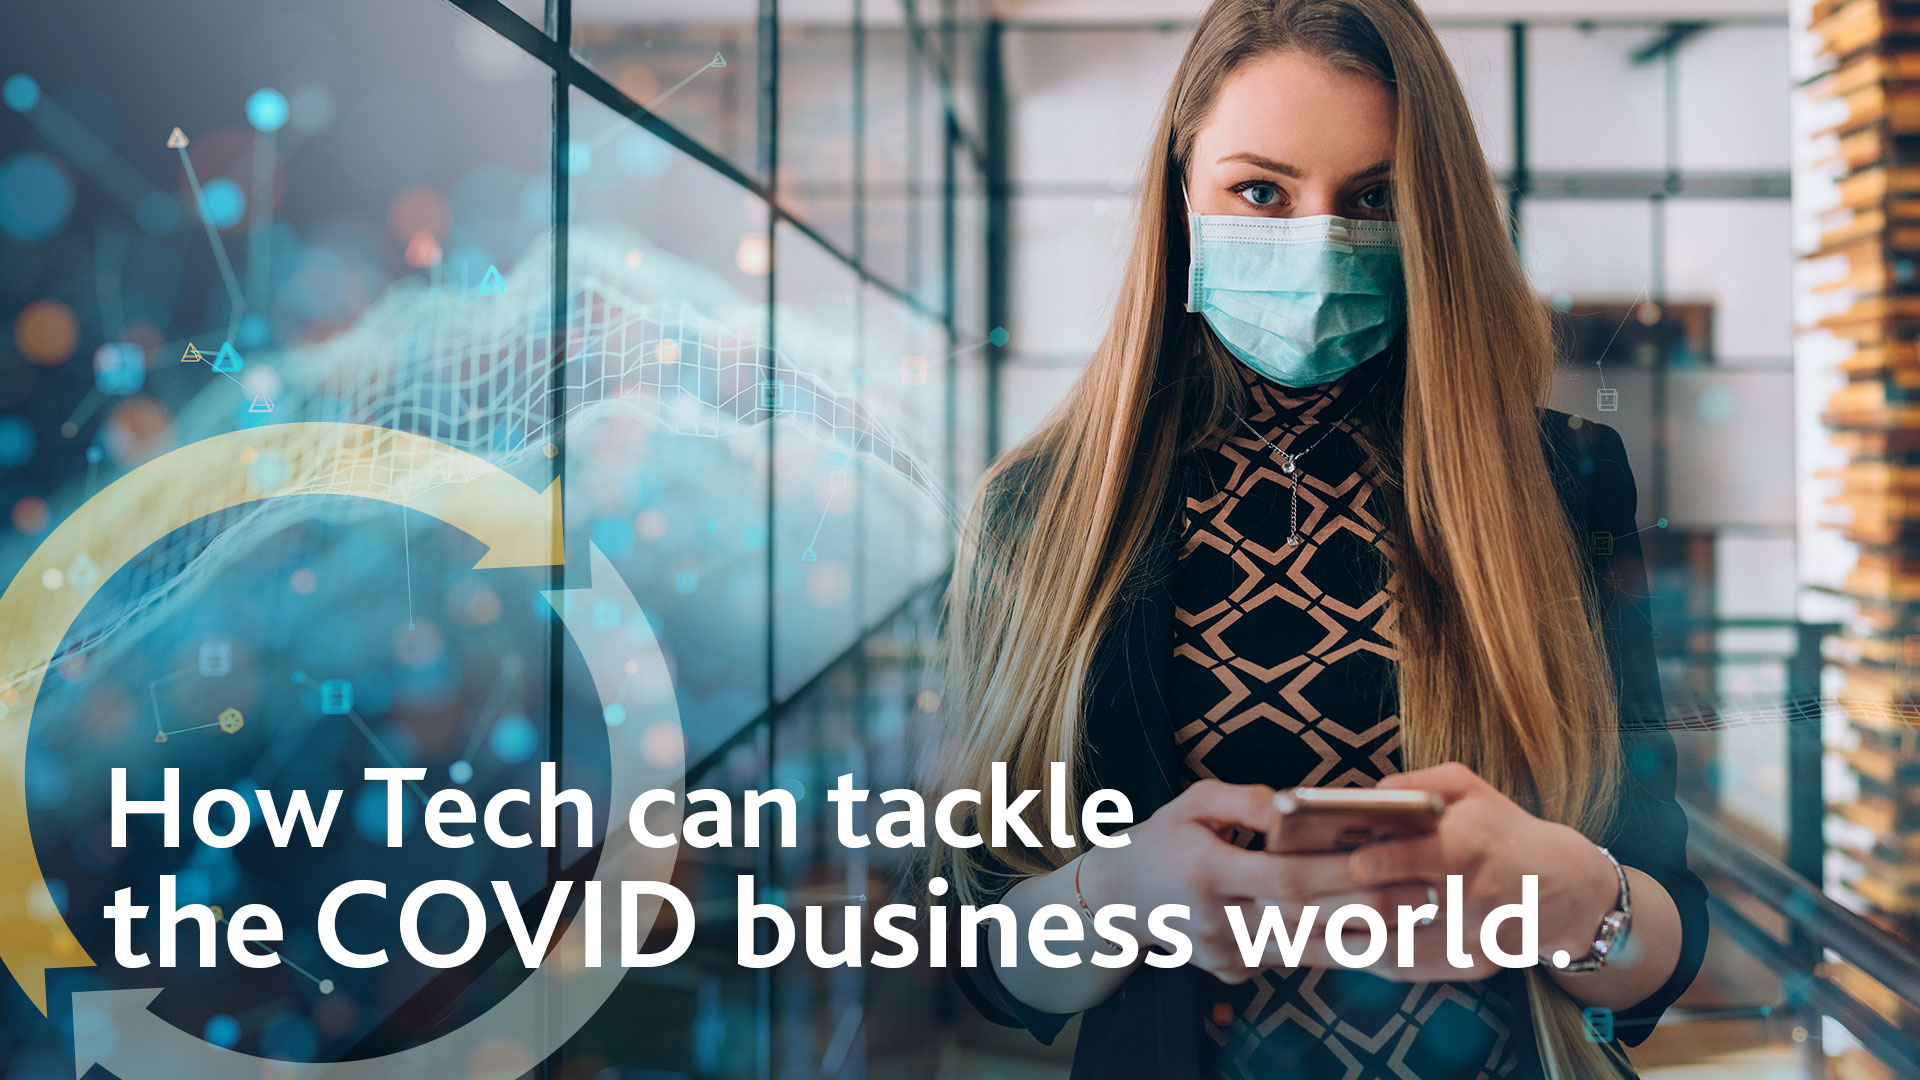 How Tech can tackle the COVID business world